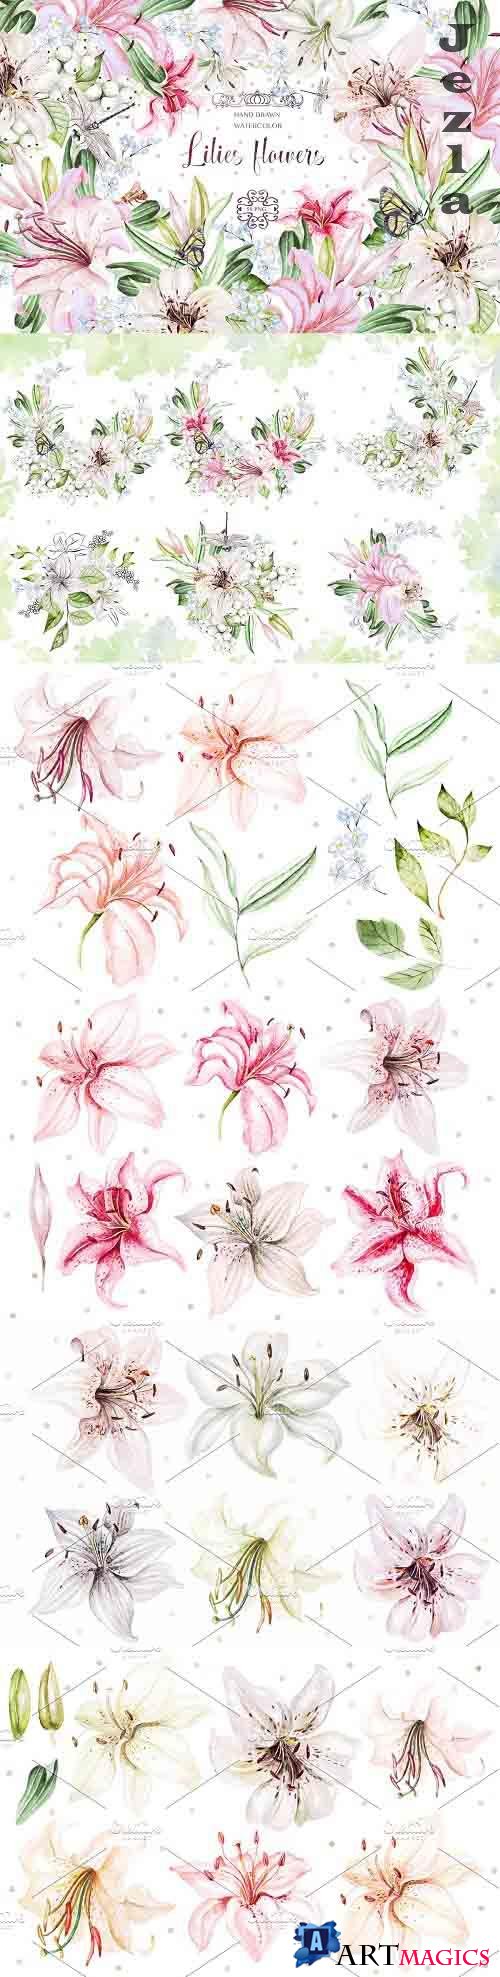 Hand Drawn watercolor flowers lily 2 - 5016942